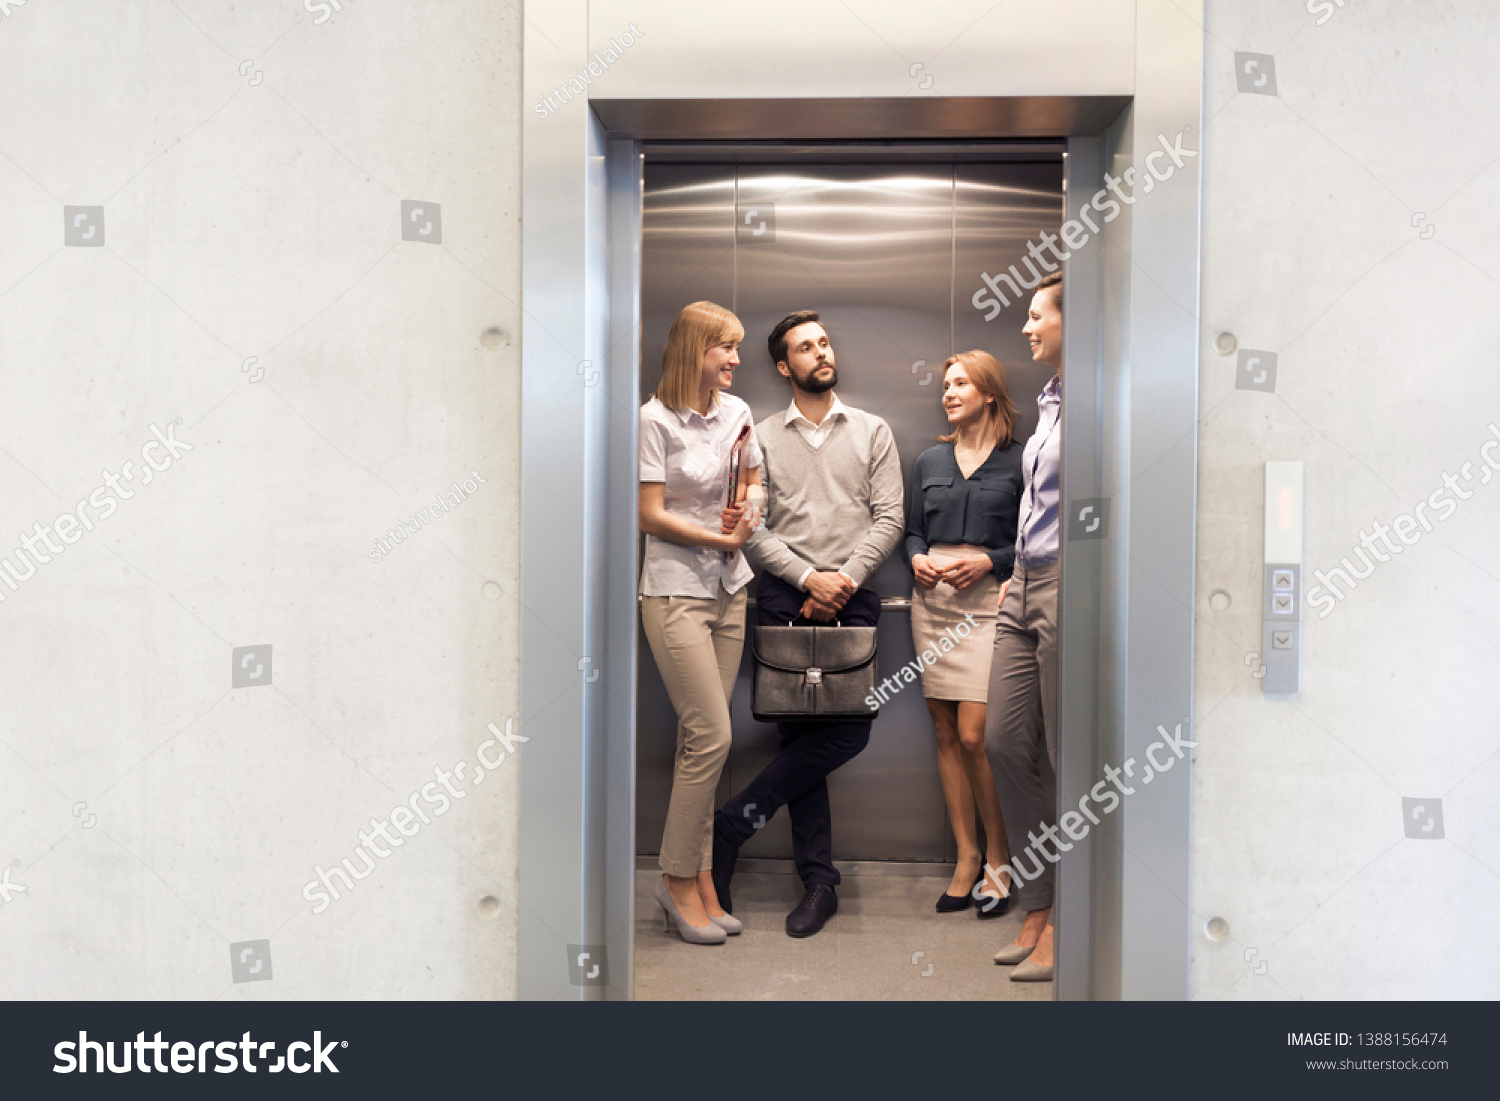 Colleagues talking while standing in elevator at office #1388156474